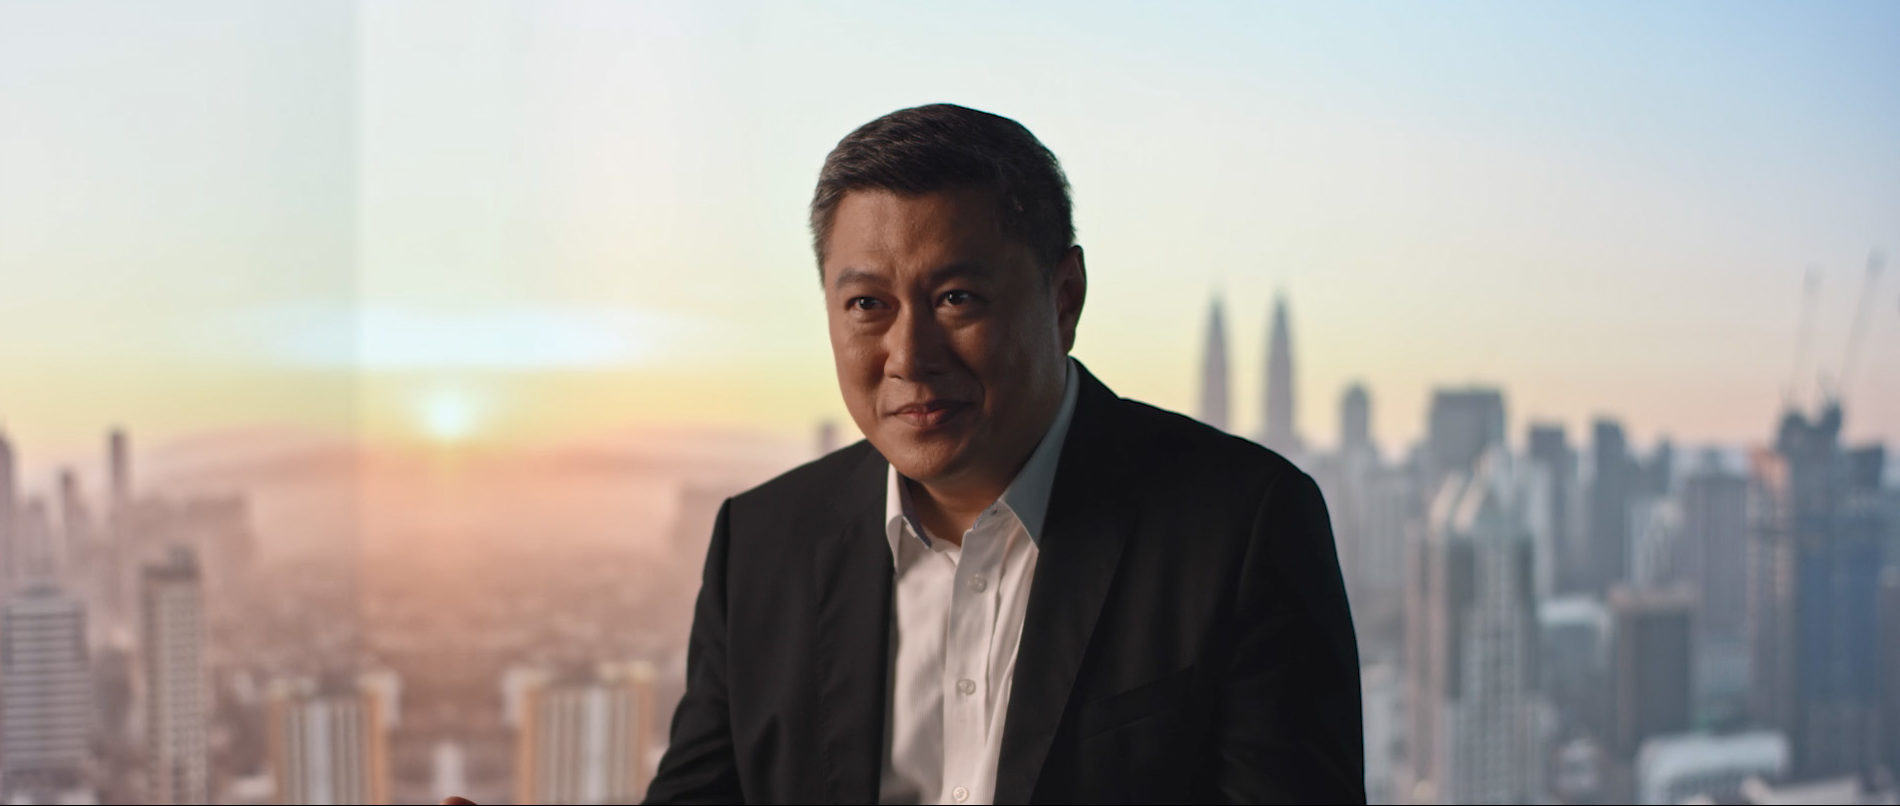 Fuji Foo, Certis’ Vice President of Business Digitalisation, believes incorporating AI into Certis’ and its customers’ operations will address labour shortages